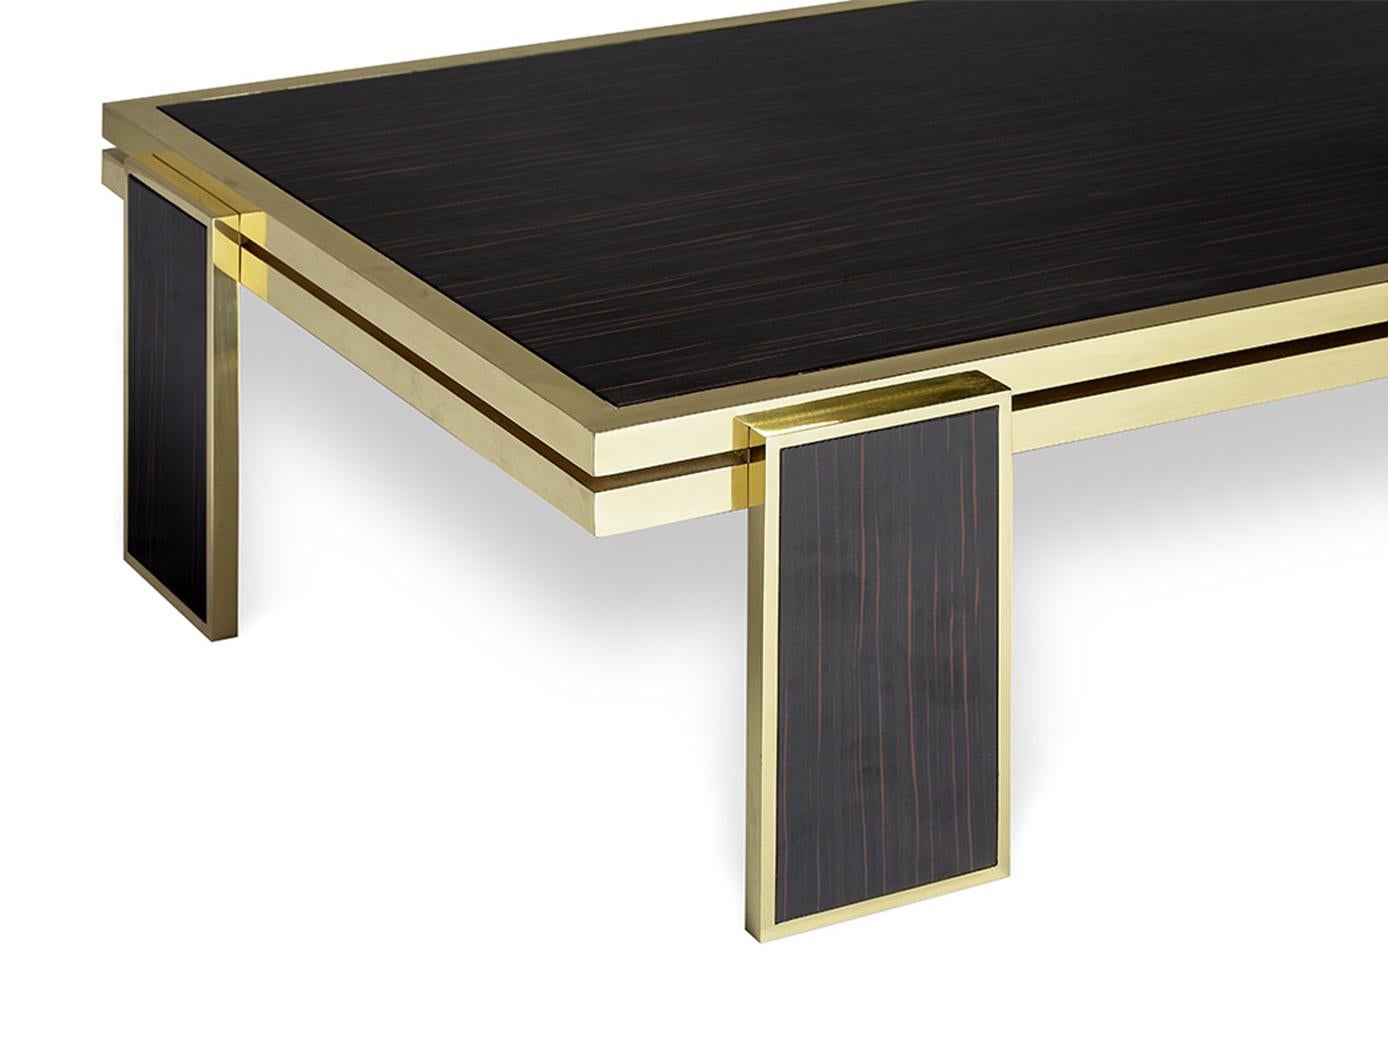 James coffee table is a bold and exciting piece capable to add a touch of sophisticated elegance to any room. The geometric shapes and lines of this modern coffee table combined with the high gloss ebony wood and polished brass details create an